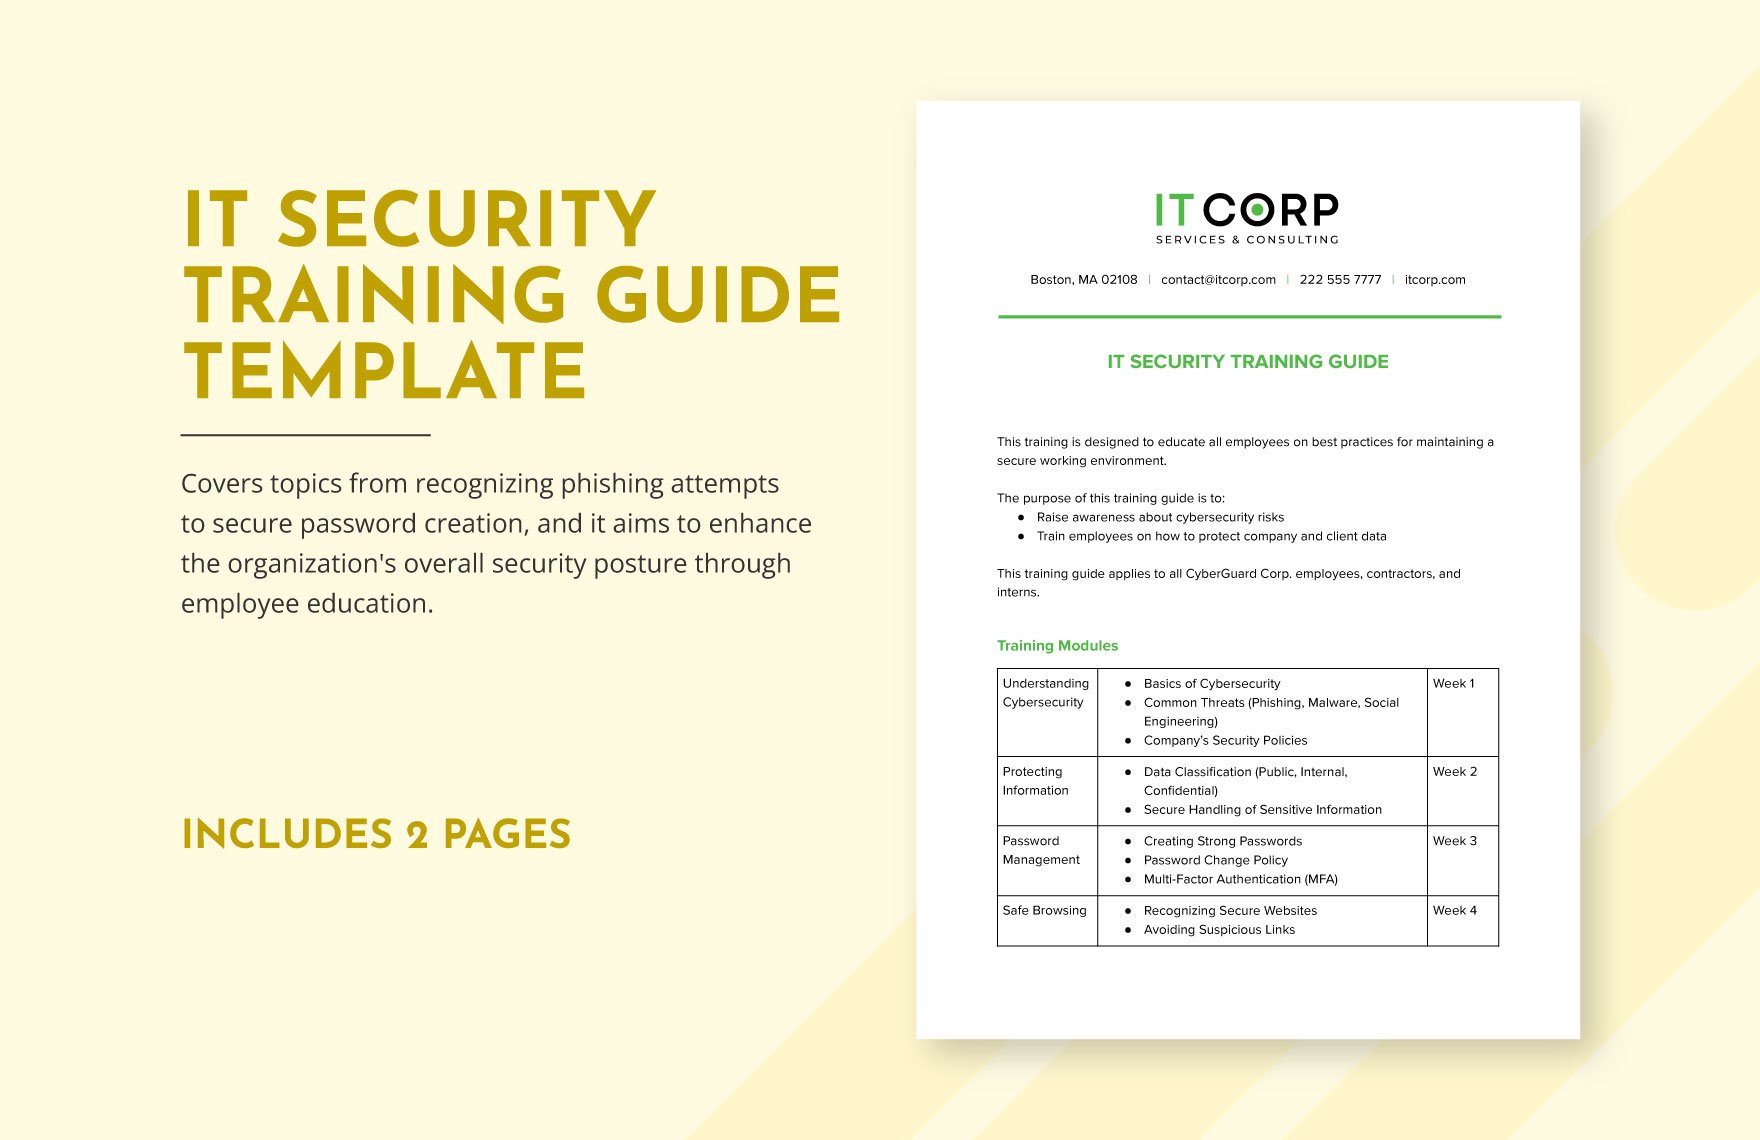 IT Security Training Guide Template